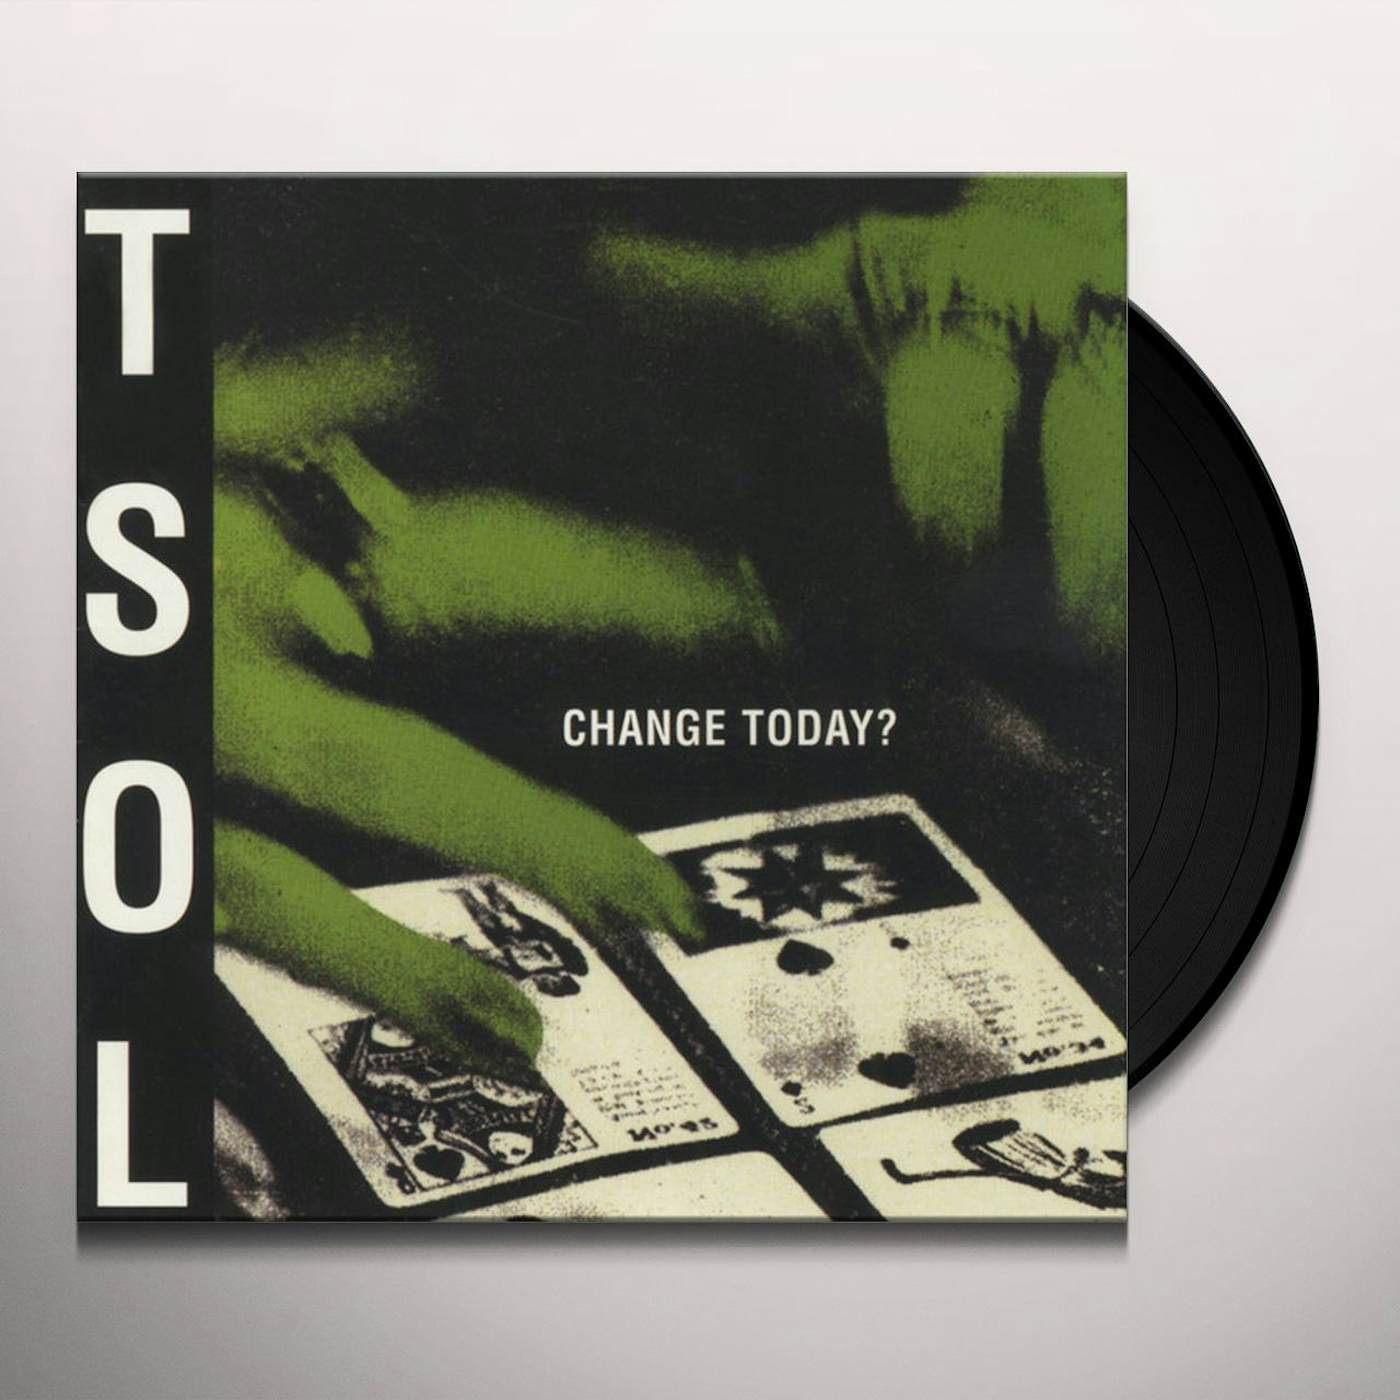 T.S.O.L. Change Today? Vinyl Record